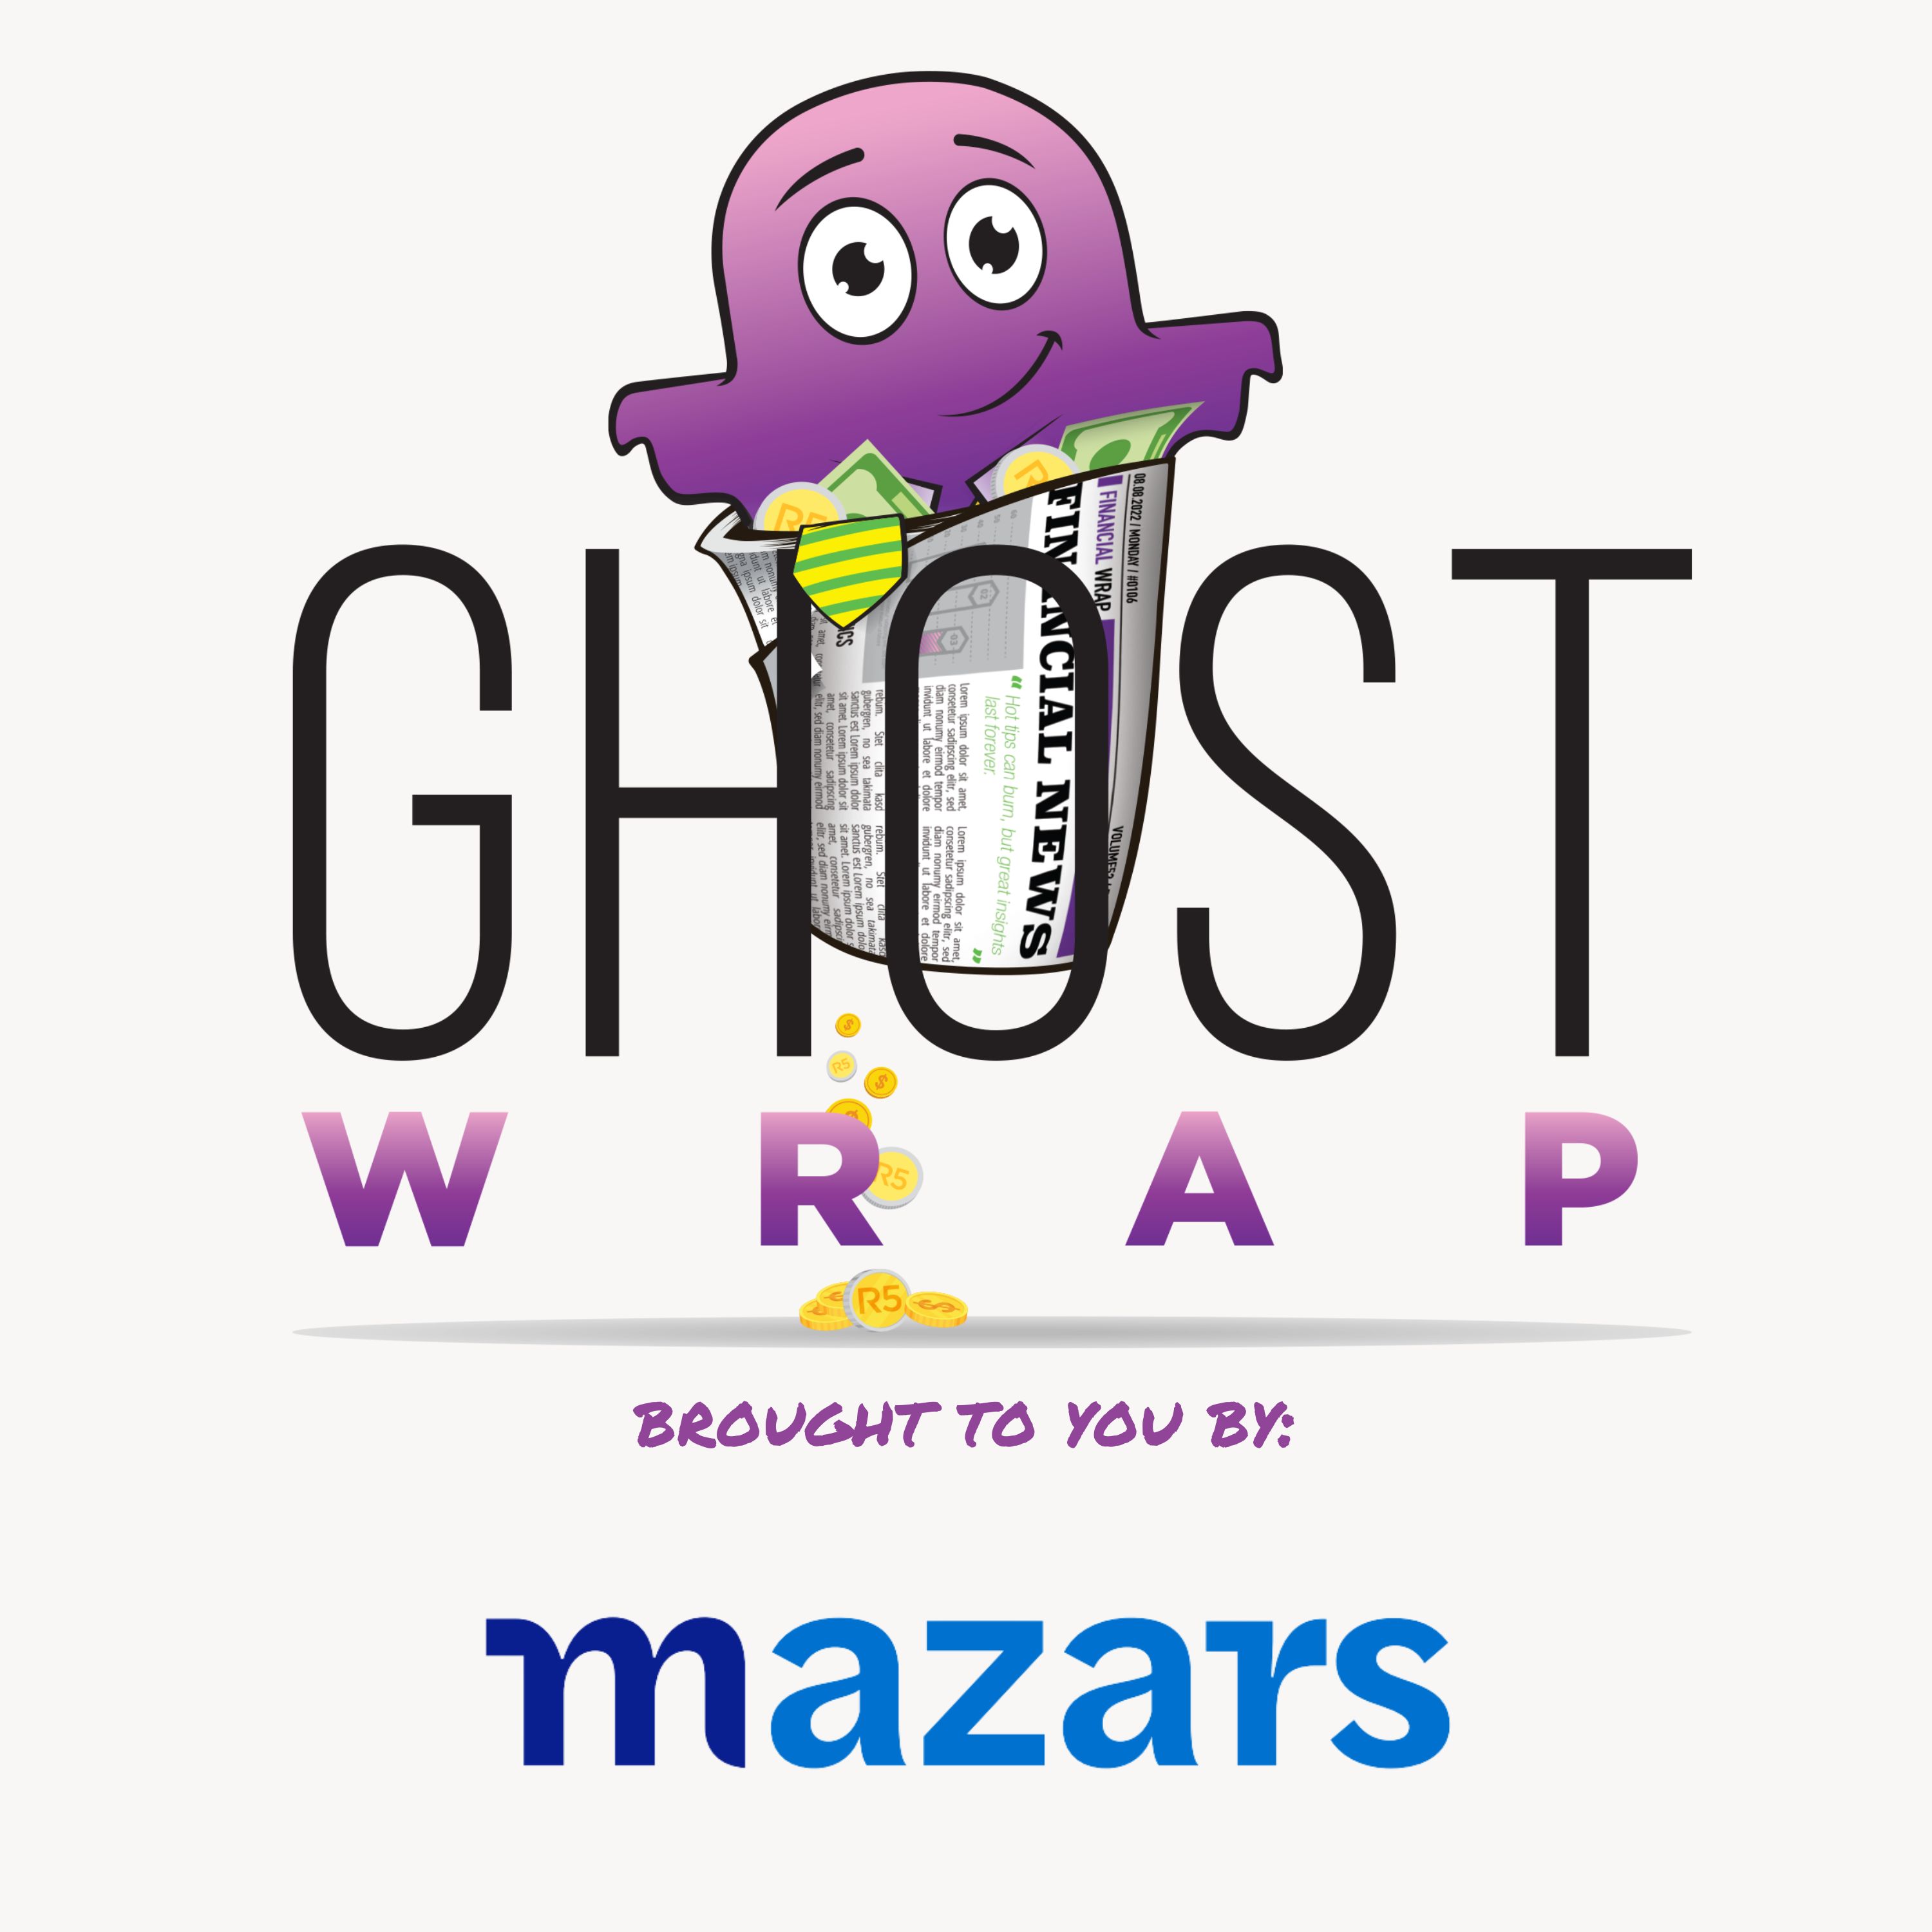 Ghost Wrap #33 (Bell Equipment | Invicta | Tharisa | Sasol | RMB Holdings | Accelerate Property Fund | Bytes Technology | Absa)